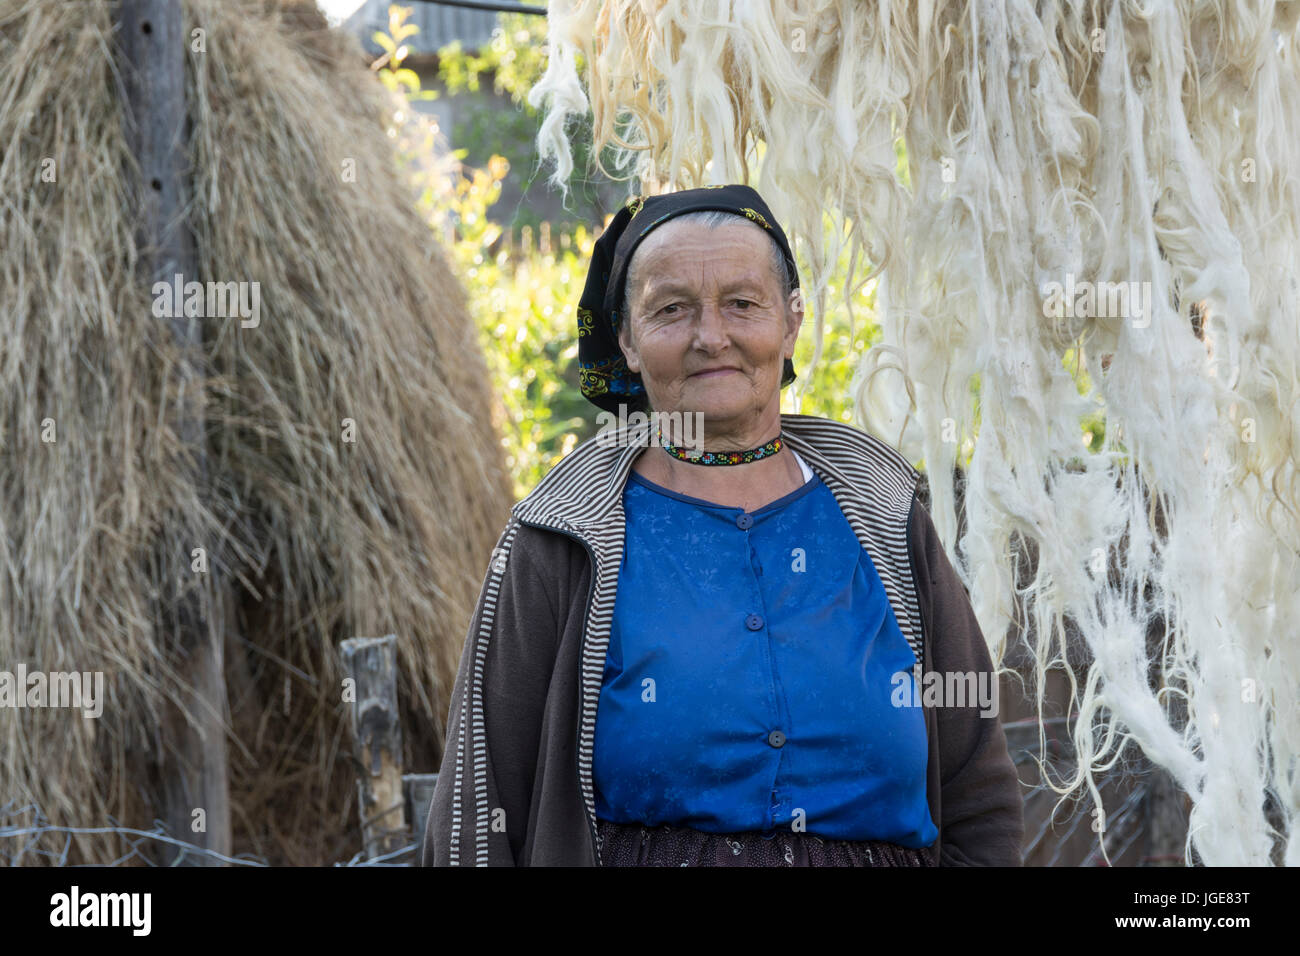 A woman with sheep wool to dry out in the open air in the Maramures regionA woman with sheep wool to dry out in the open air in the Maramures region Stock Photo